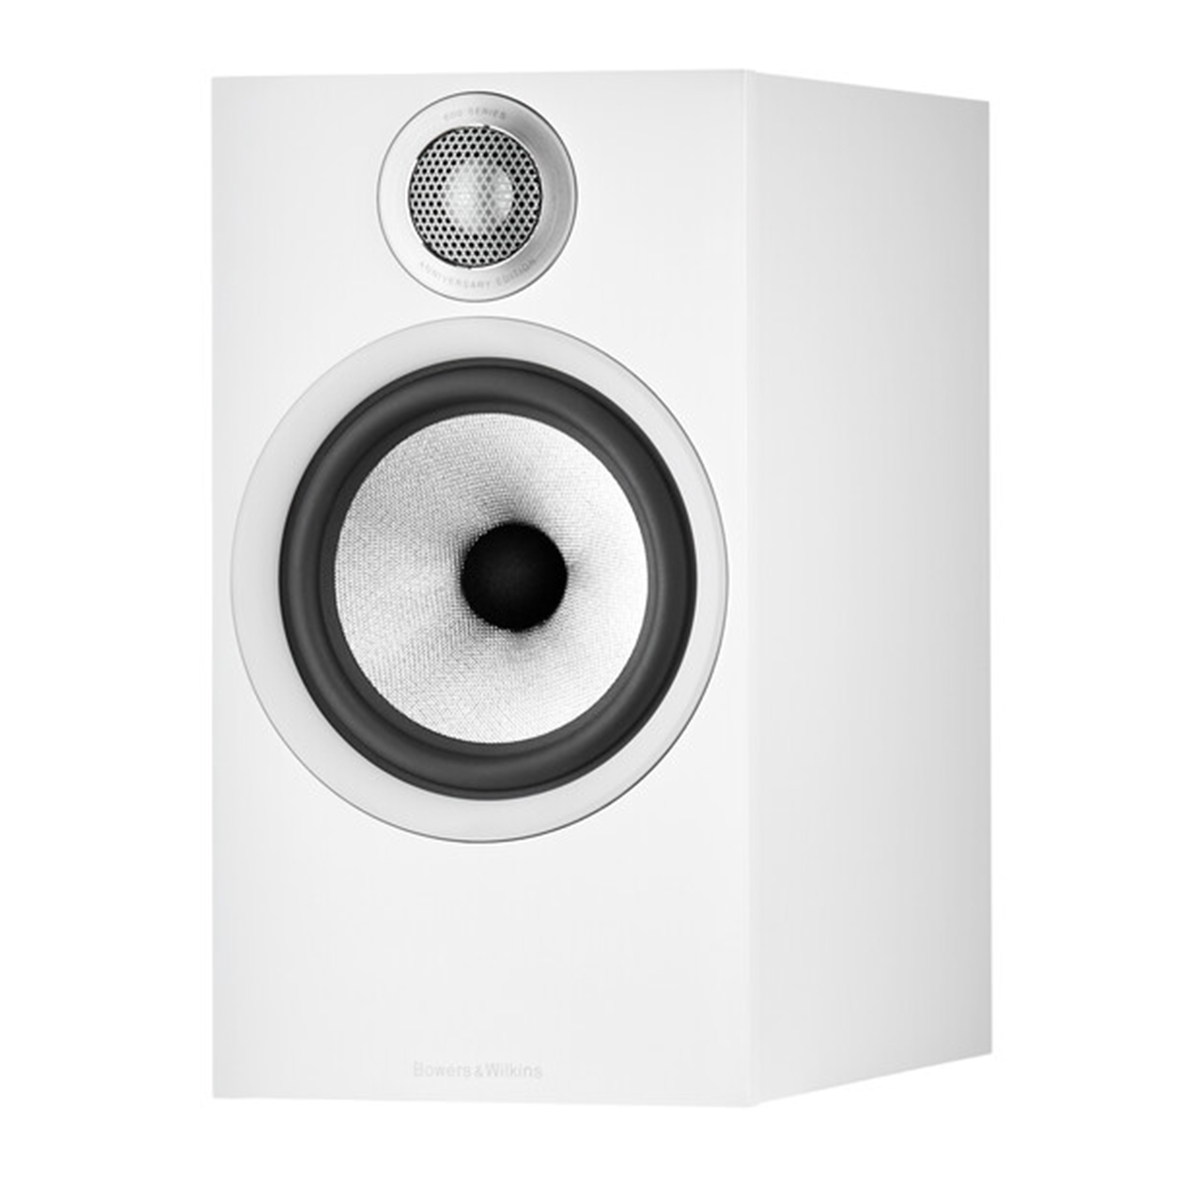 Bowers & Wilkins OPEN BOX 606 S2 Anniversary Edition Bookshelf Speakers - Pair - White - Excellent Condition - FP42625